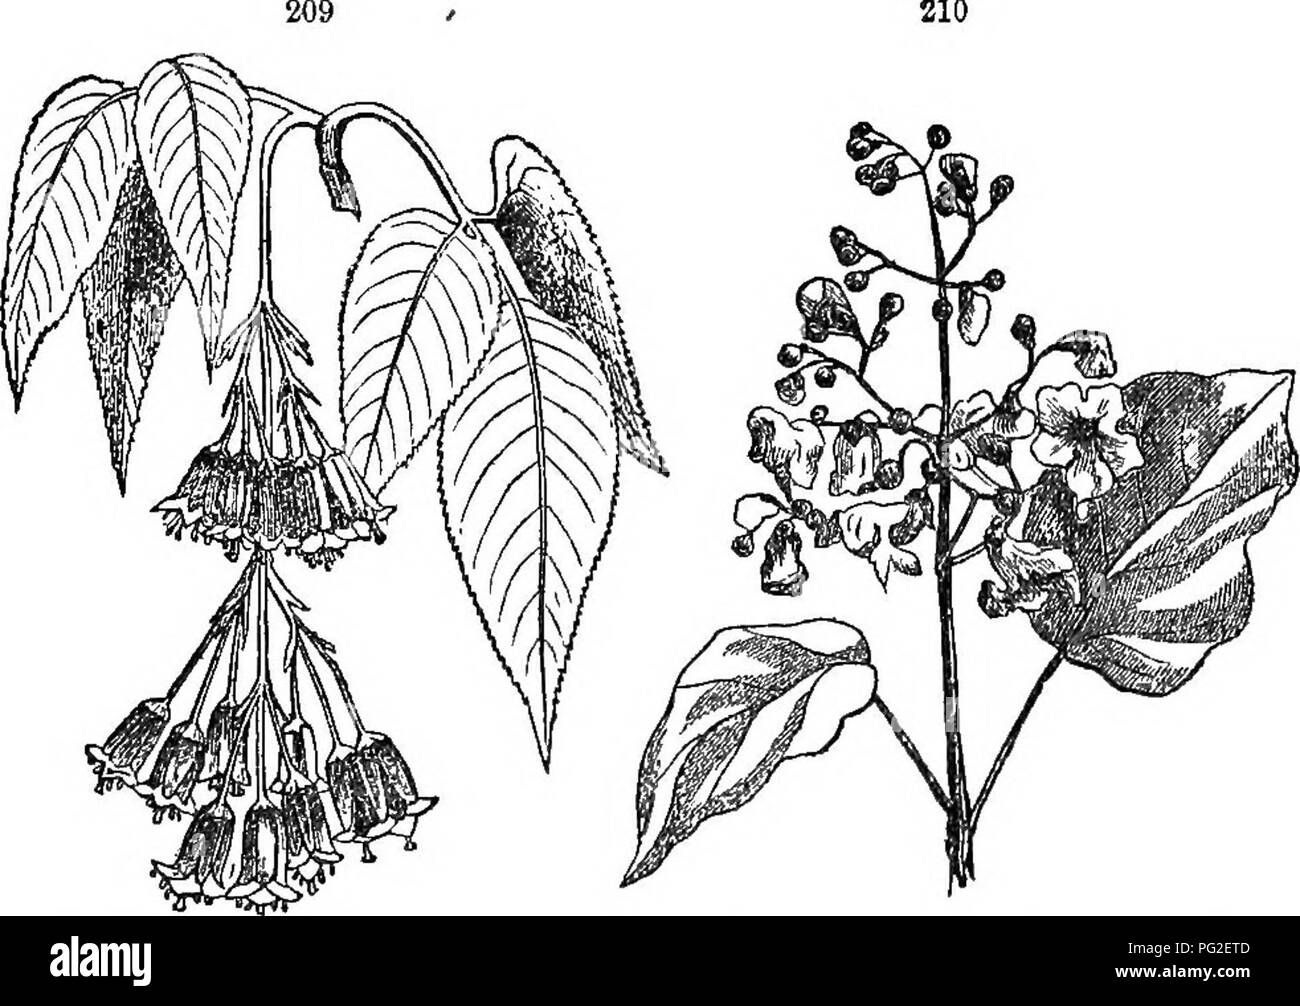 . Class-book of botany : being outlines of the structure, physiology, and classification of plants ; with a flora of the United States and Canada . Botany; Botany; Botany. 20T 205 204 206 203 203, Anclromeda racemoaa ; flowers in a secund raceme. 204, Verbascum Blattarla; raceme. 806, LuUucn perenne ; a compound spike or a spike of spikelets. 206, Dipsacus sylvestris ; head with an involucre of leaves. 207, Osmorhiza longistylis ; a compound umbel. 20S, Its fruit. 351. An umbbj. consists of several pedicels of about equal length radiating from the same point, the top of the common peduncle, as Stock Photo